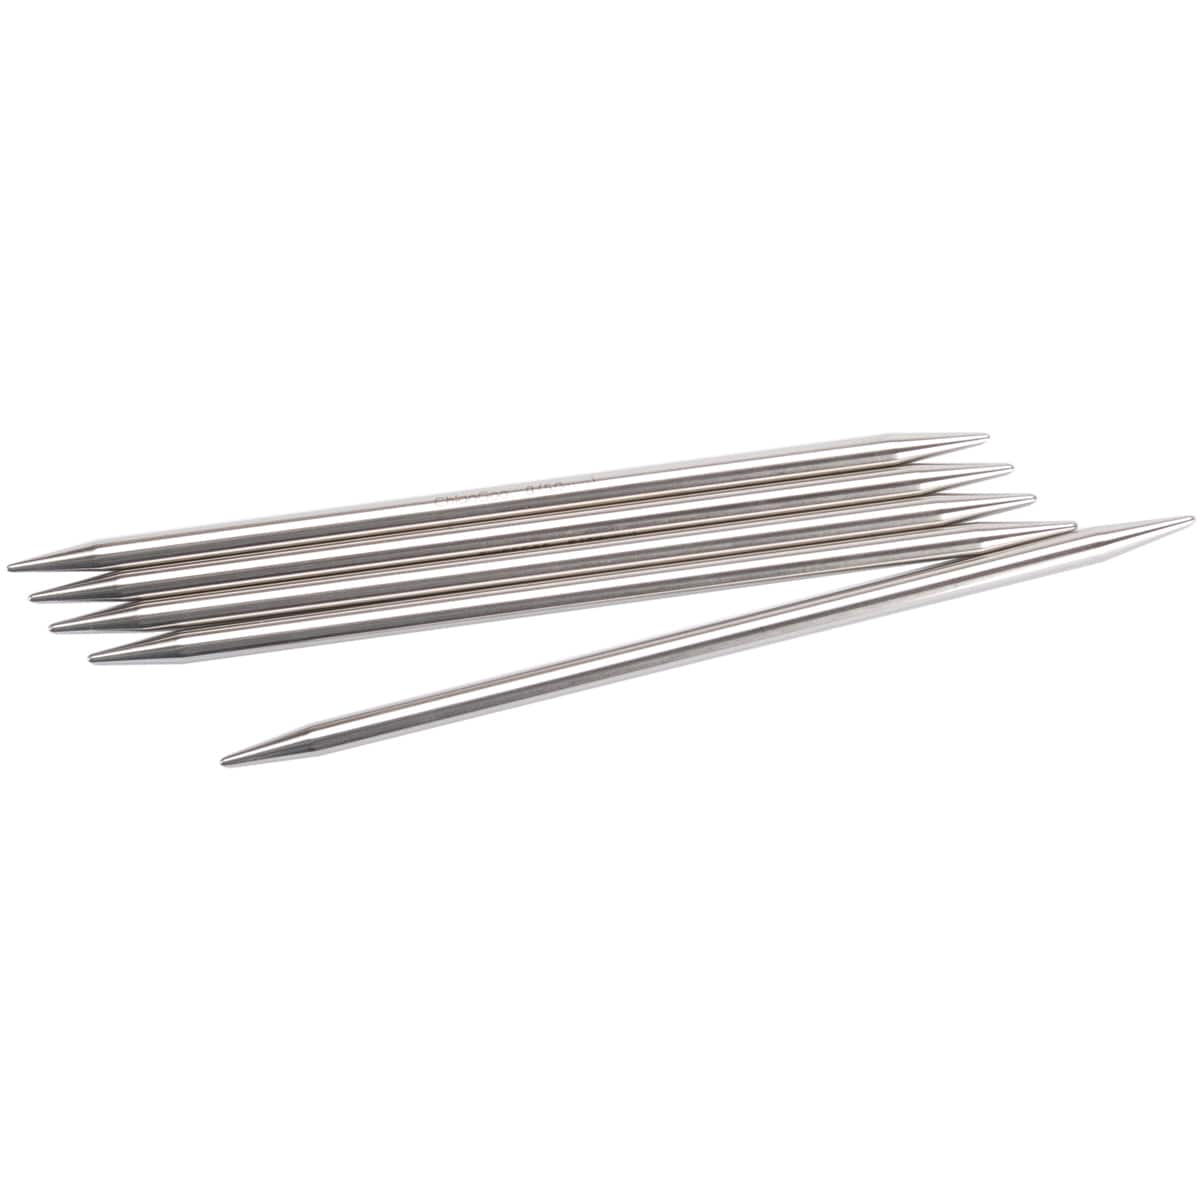 ChiaoGoo Metal Double Pointed Knitting Needles - 8